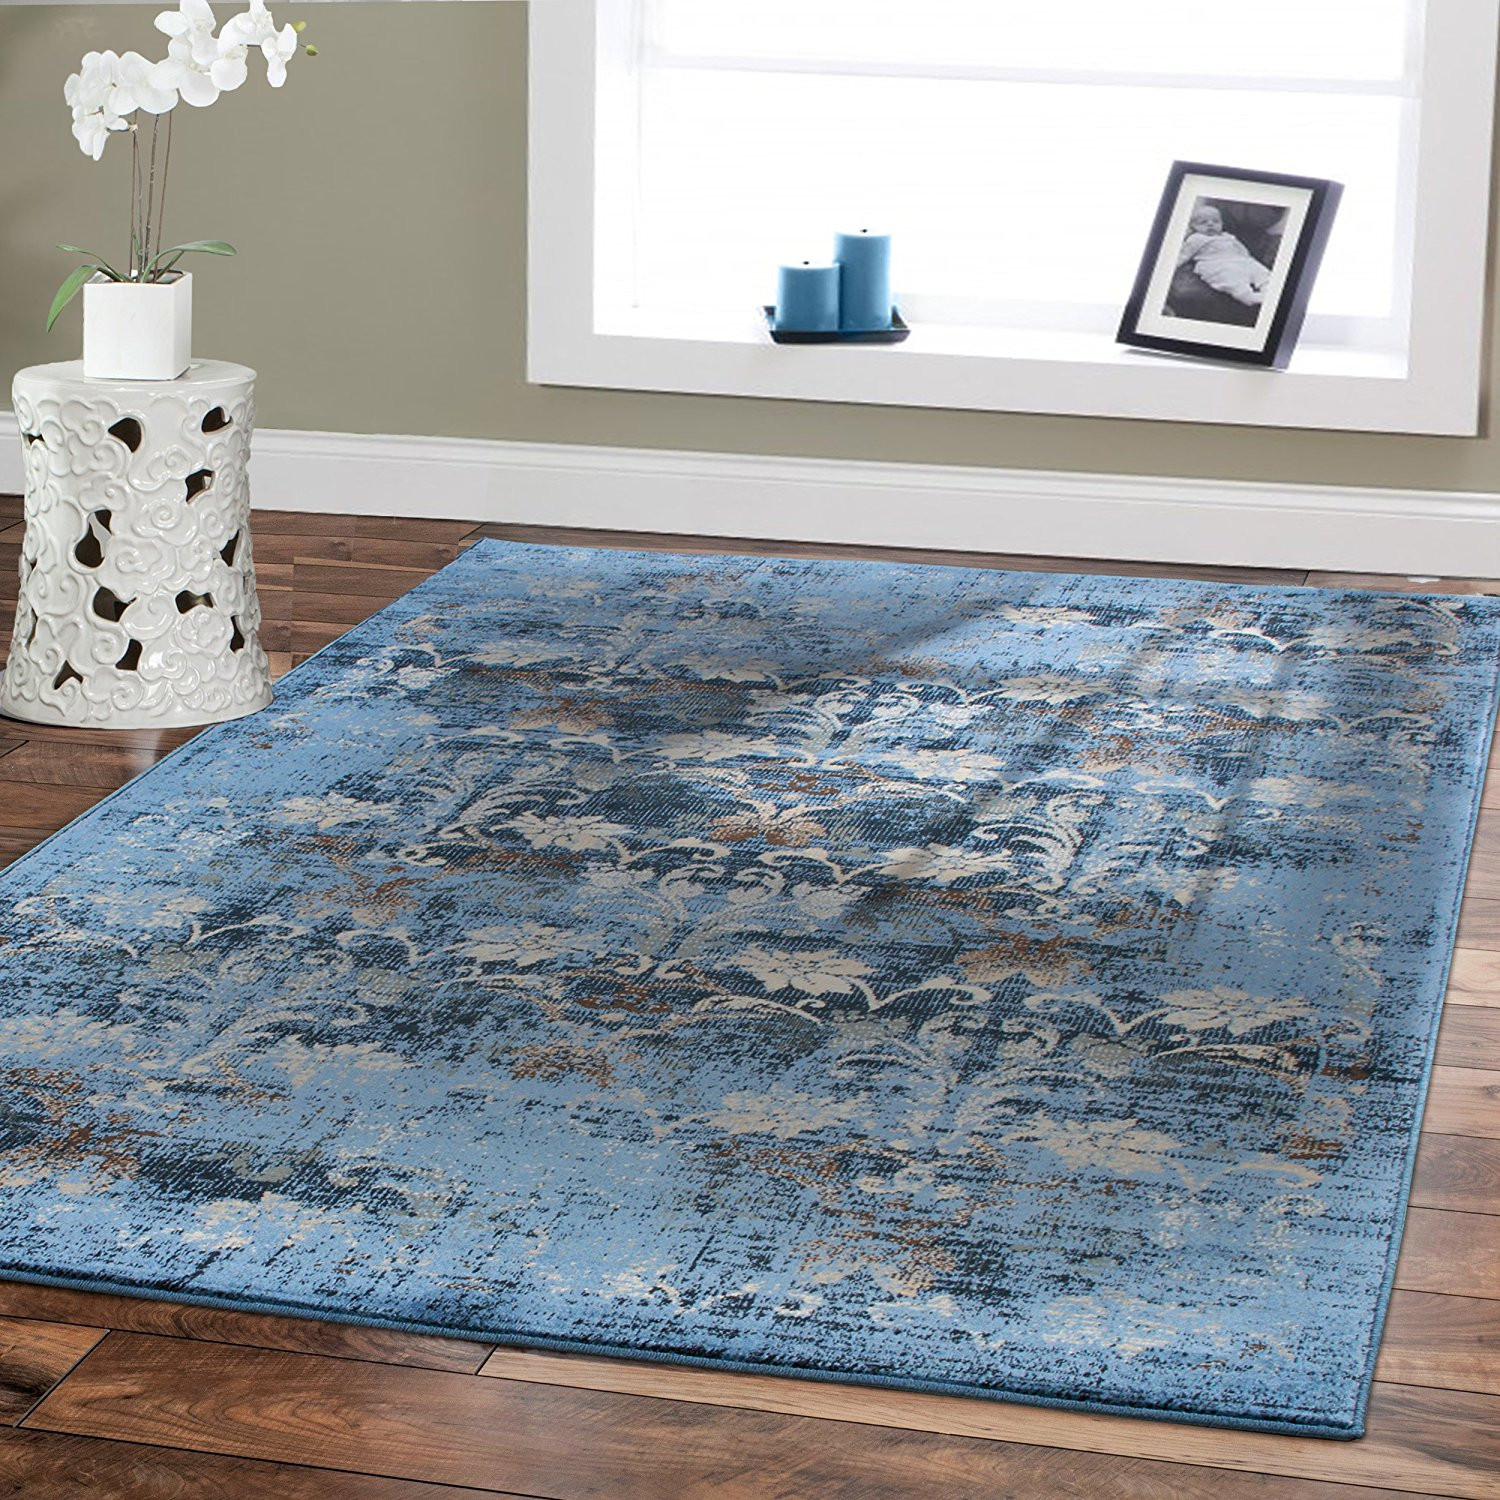 Living Room Rugs 8X10
 Premium Rugs 8x11 Rugs for Living Room 8x10 Area